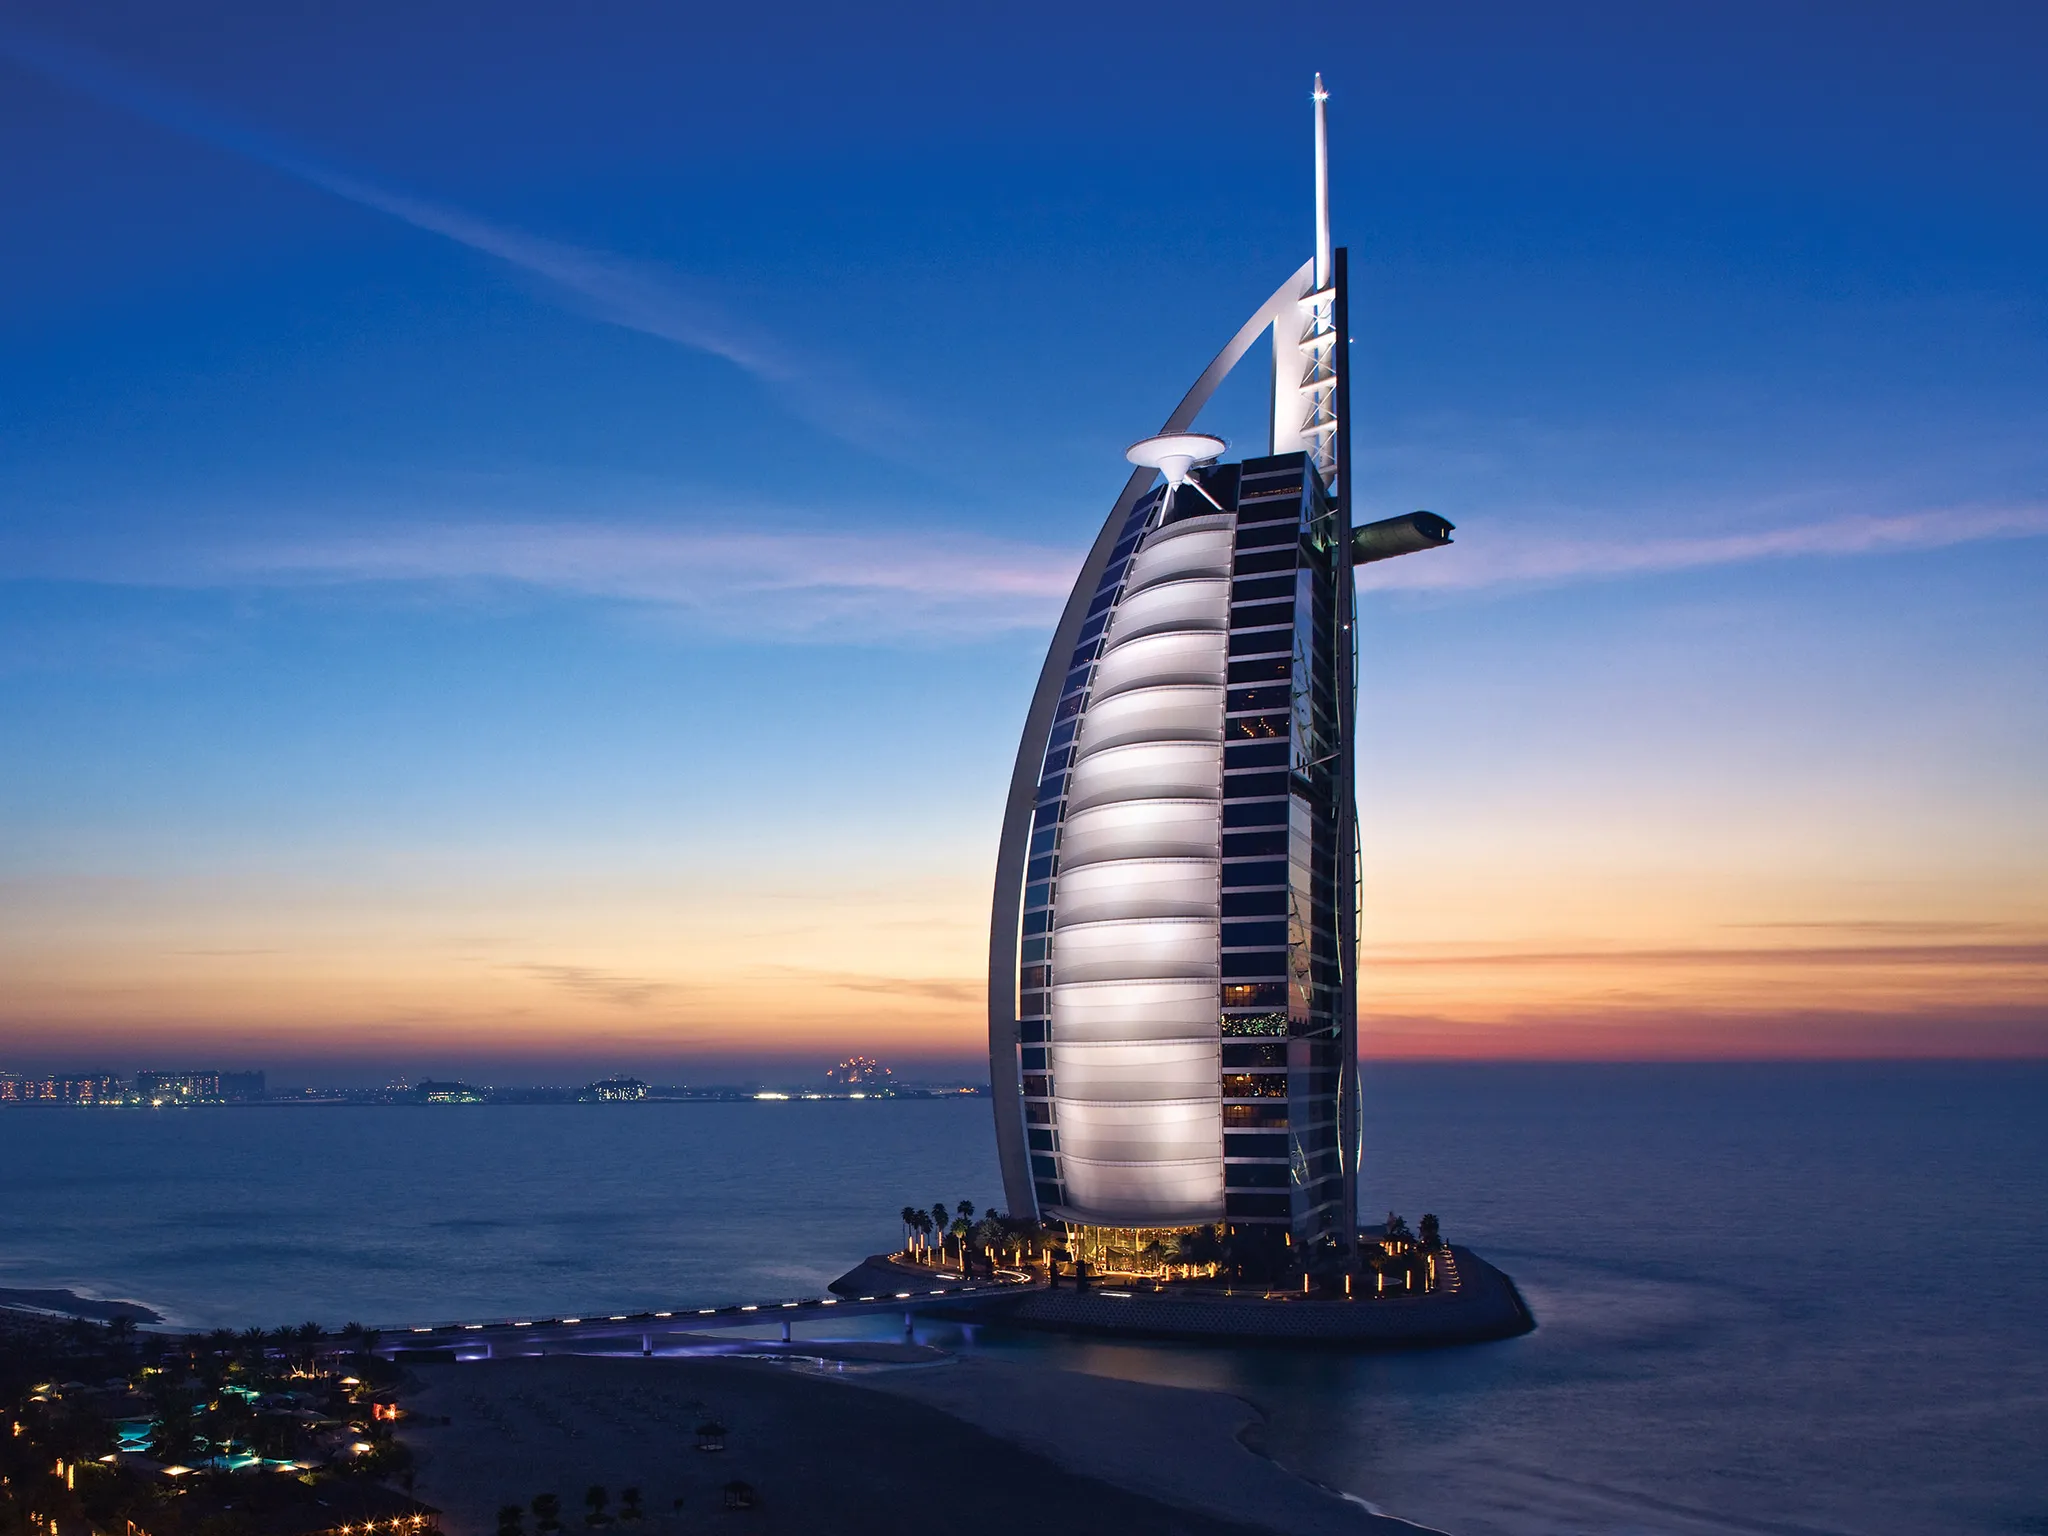 Special Package for family Dubai 3 Nights